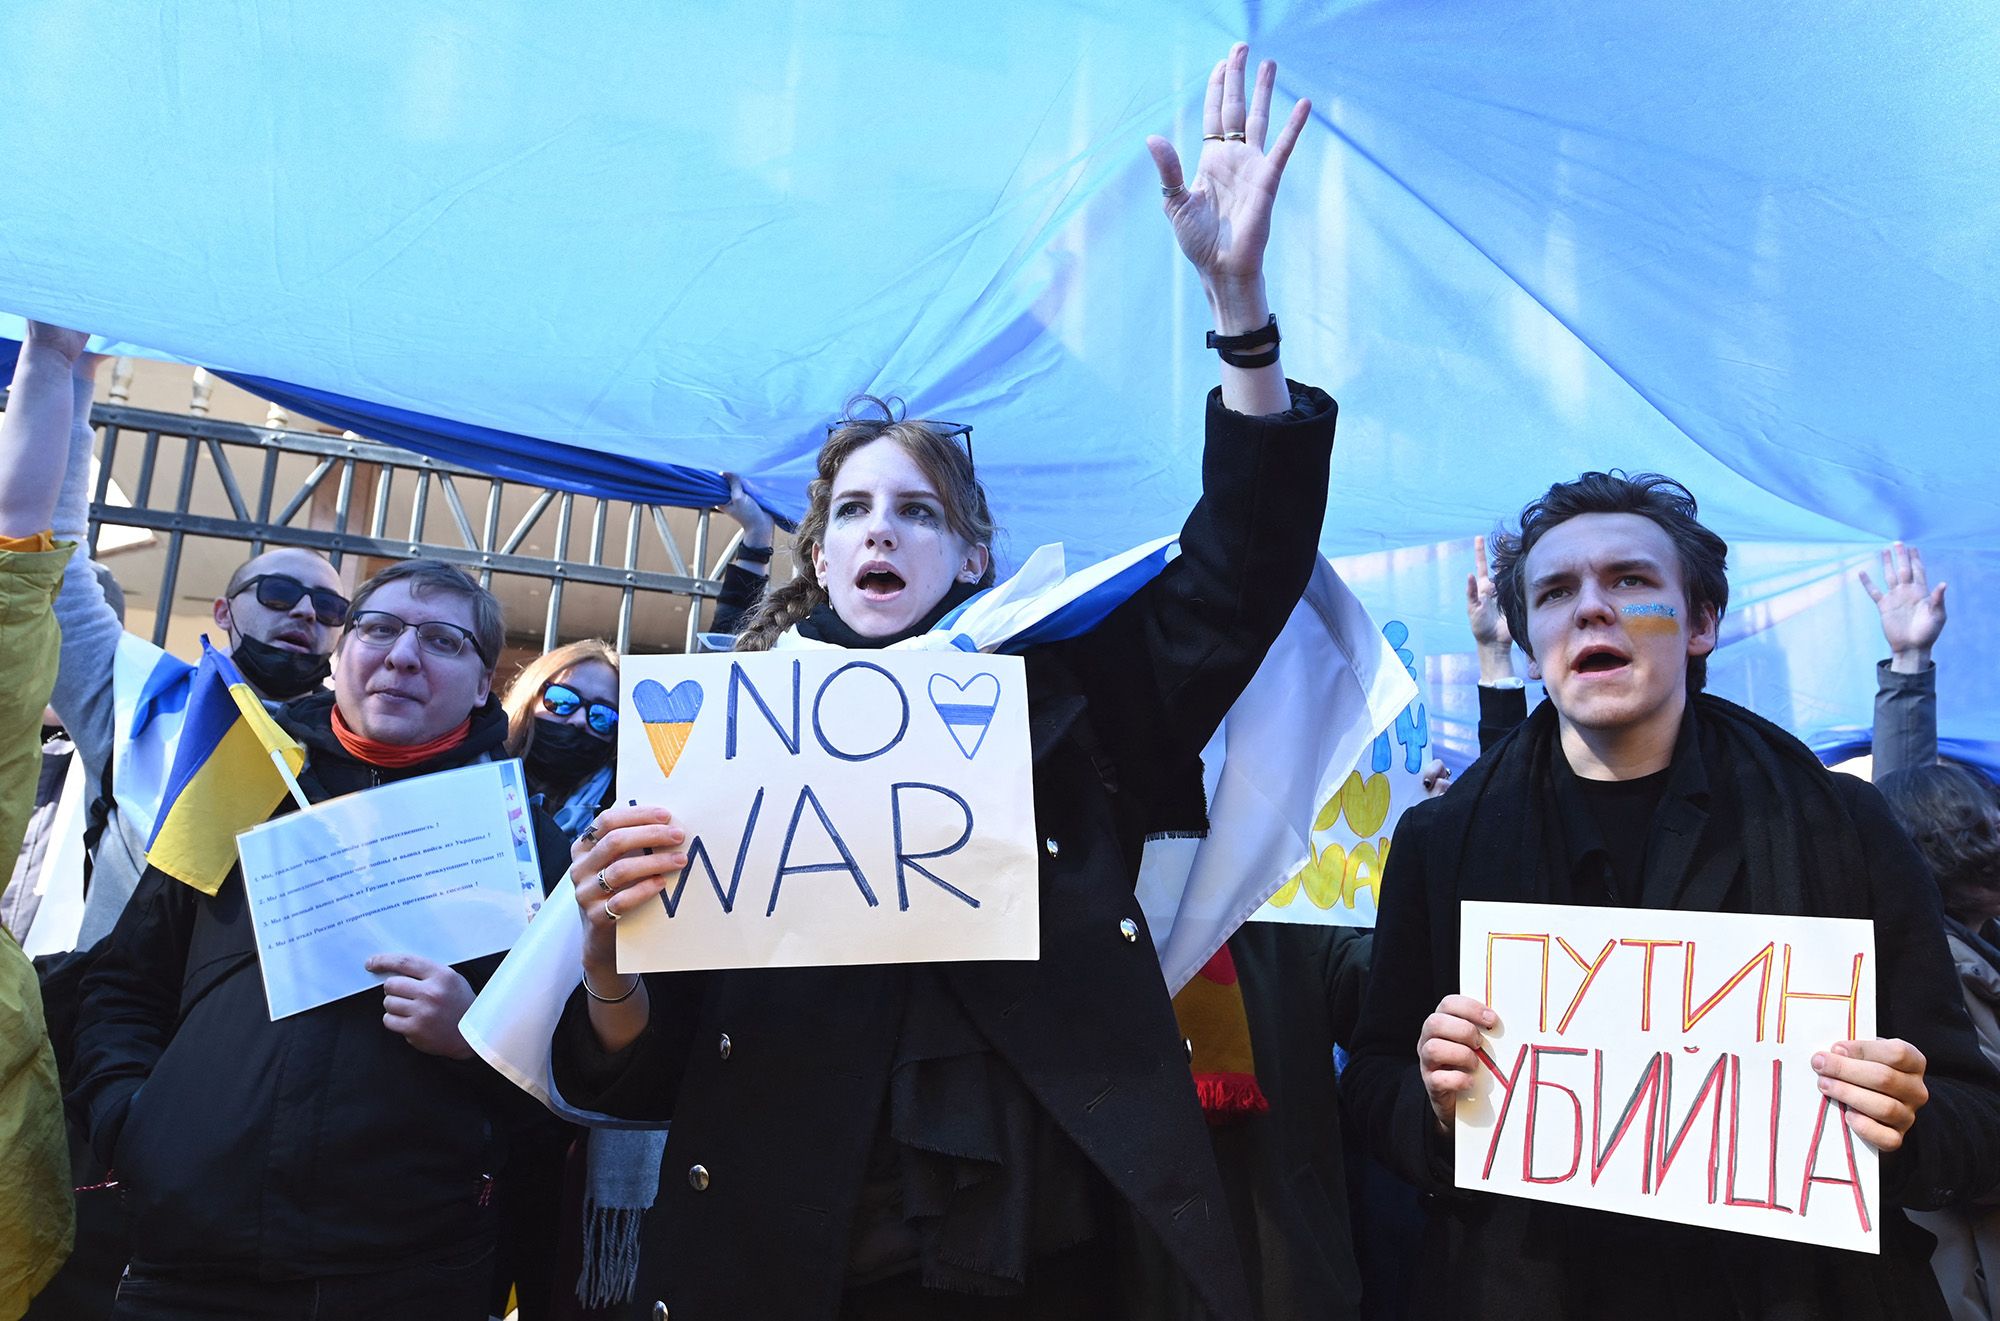 Protesters hold signs under a giant flag during a rally in front of the former Russian embassy, in Tbilisi, Georgia, on March 12, to protest against the Russian invasion of Ukraine.